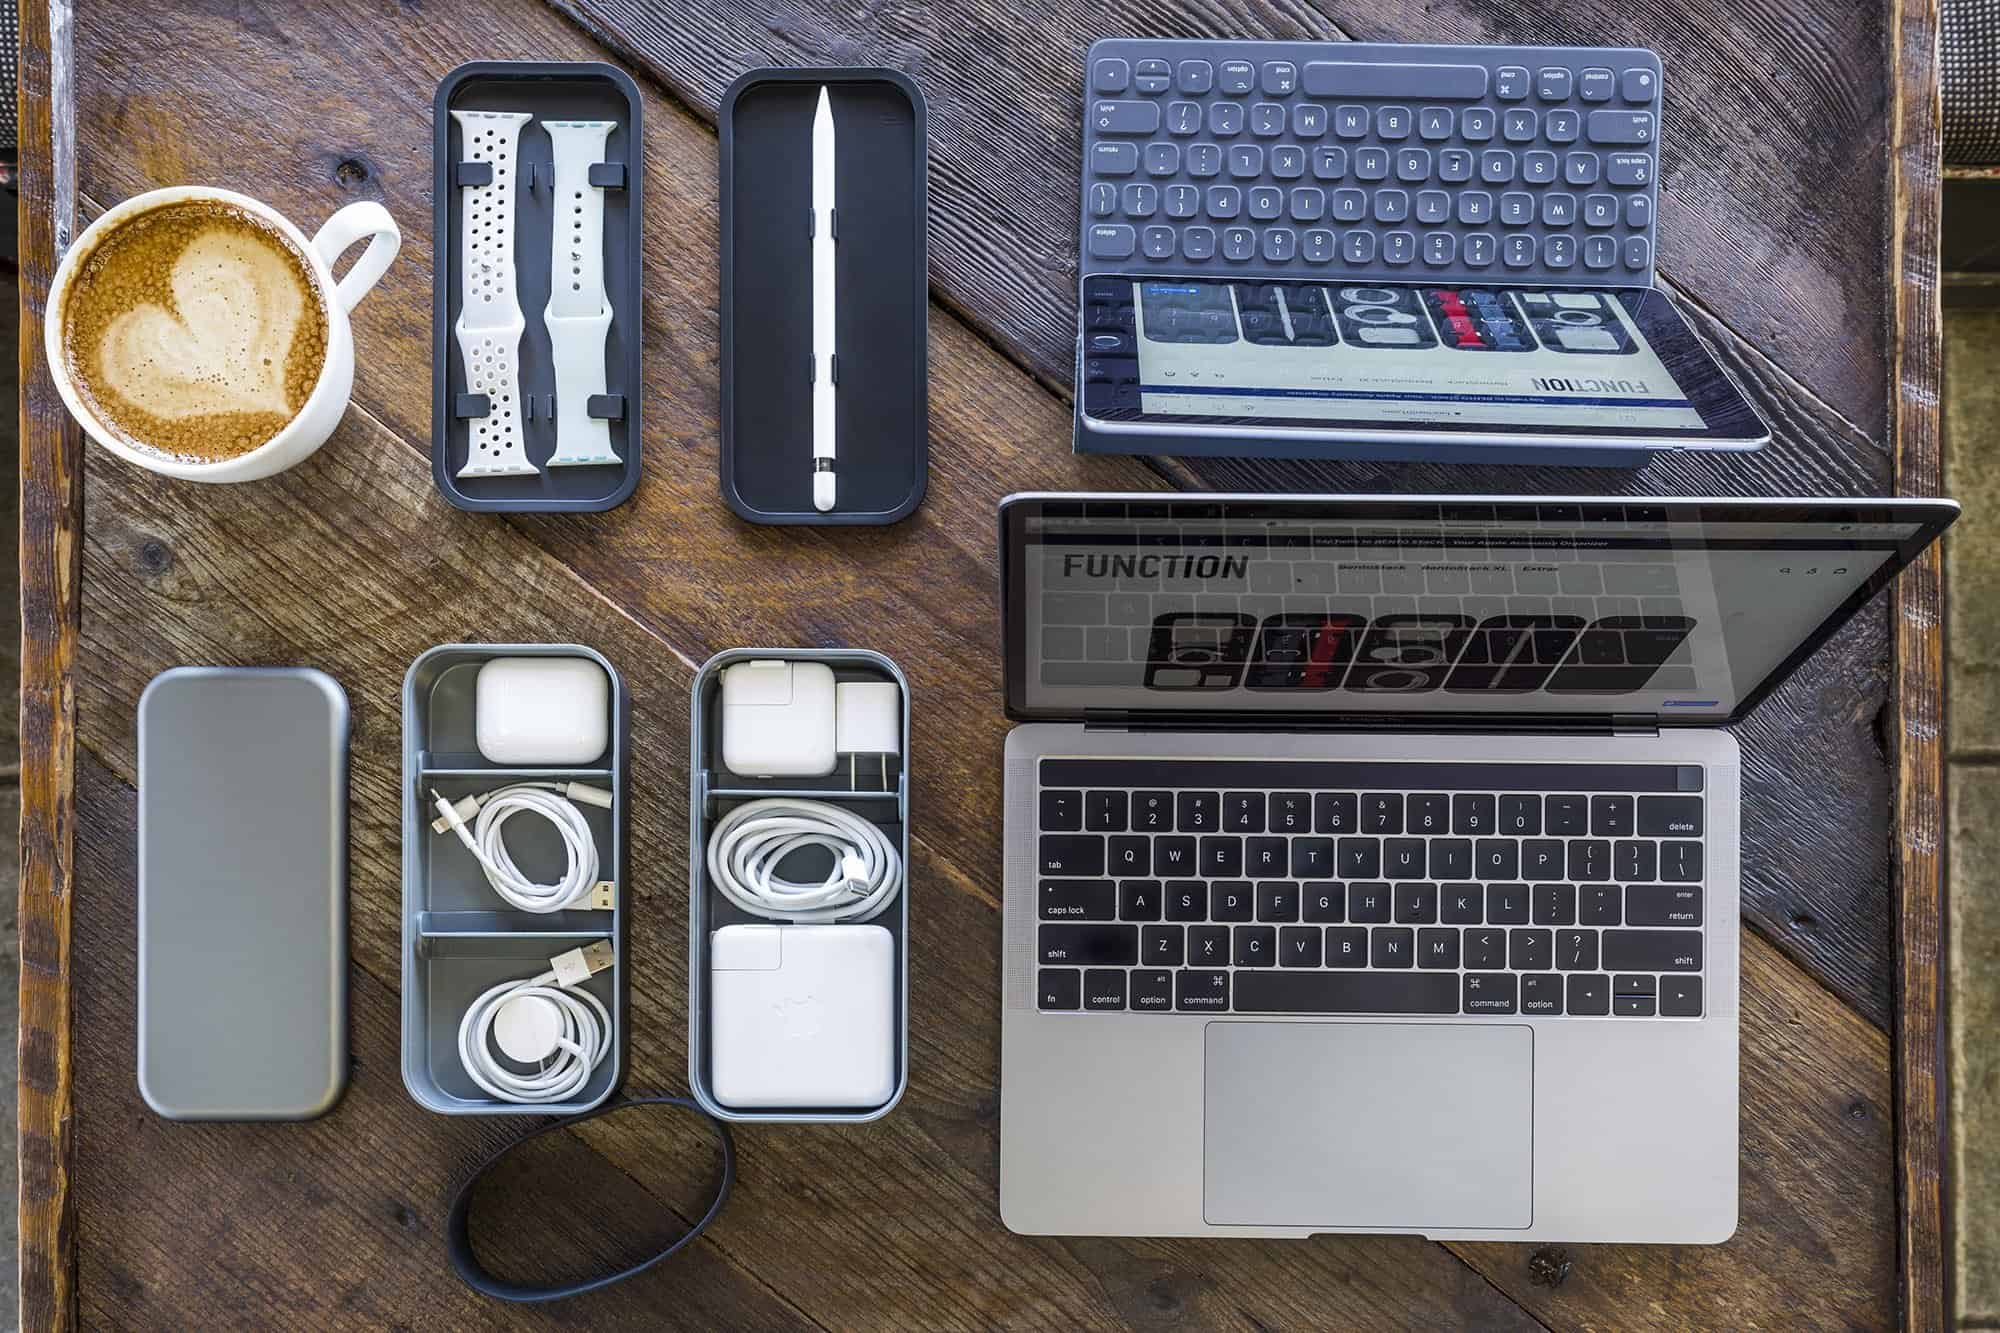 BentoStack: Your Apple extras stay orderly in this sleek, modular organizer inspired by Japanese design